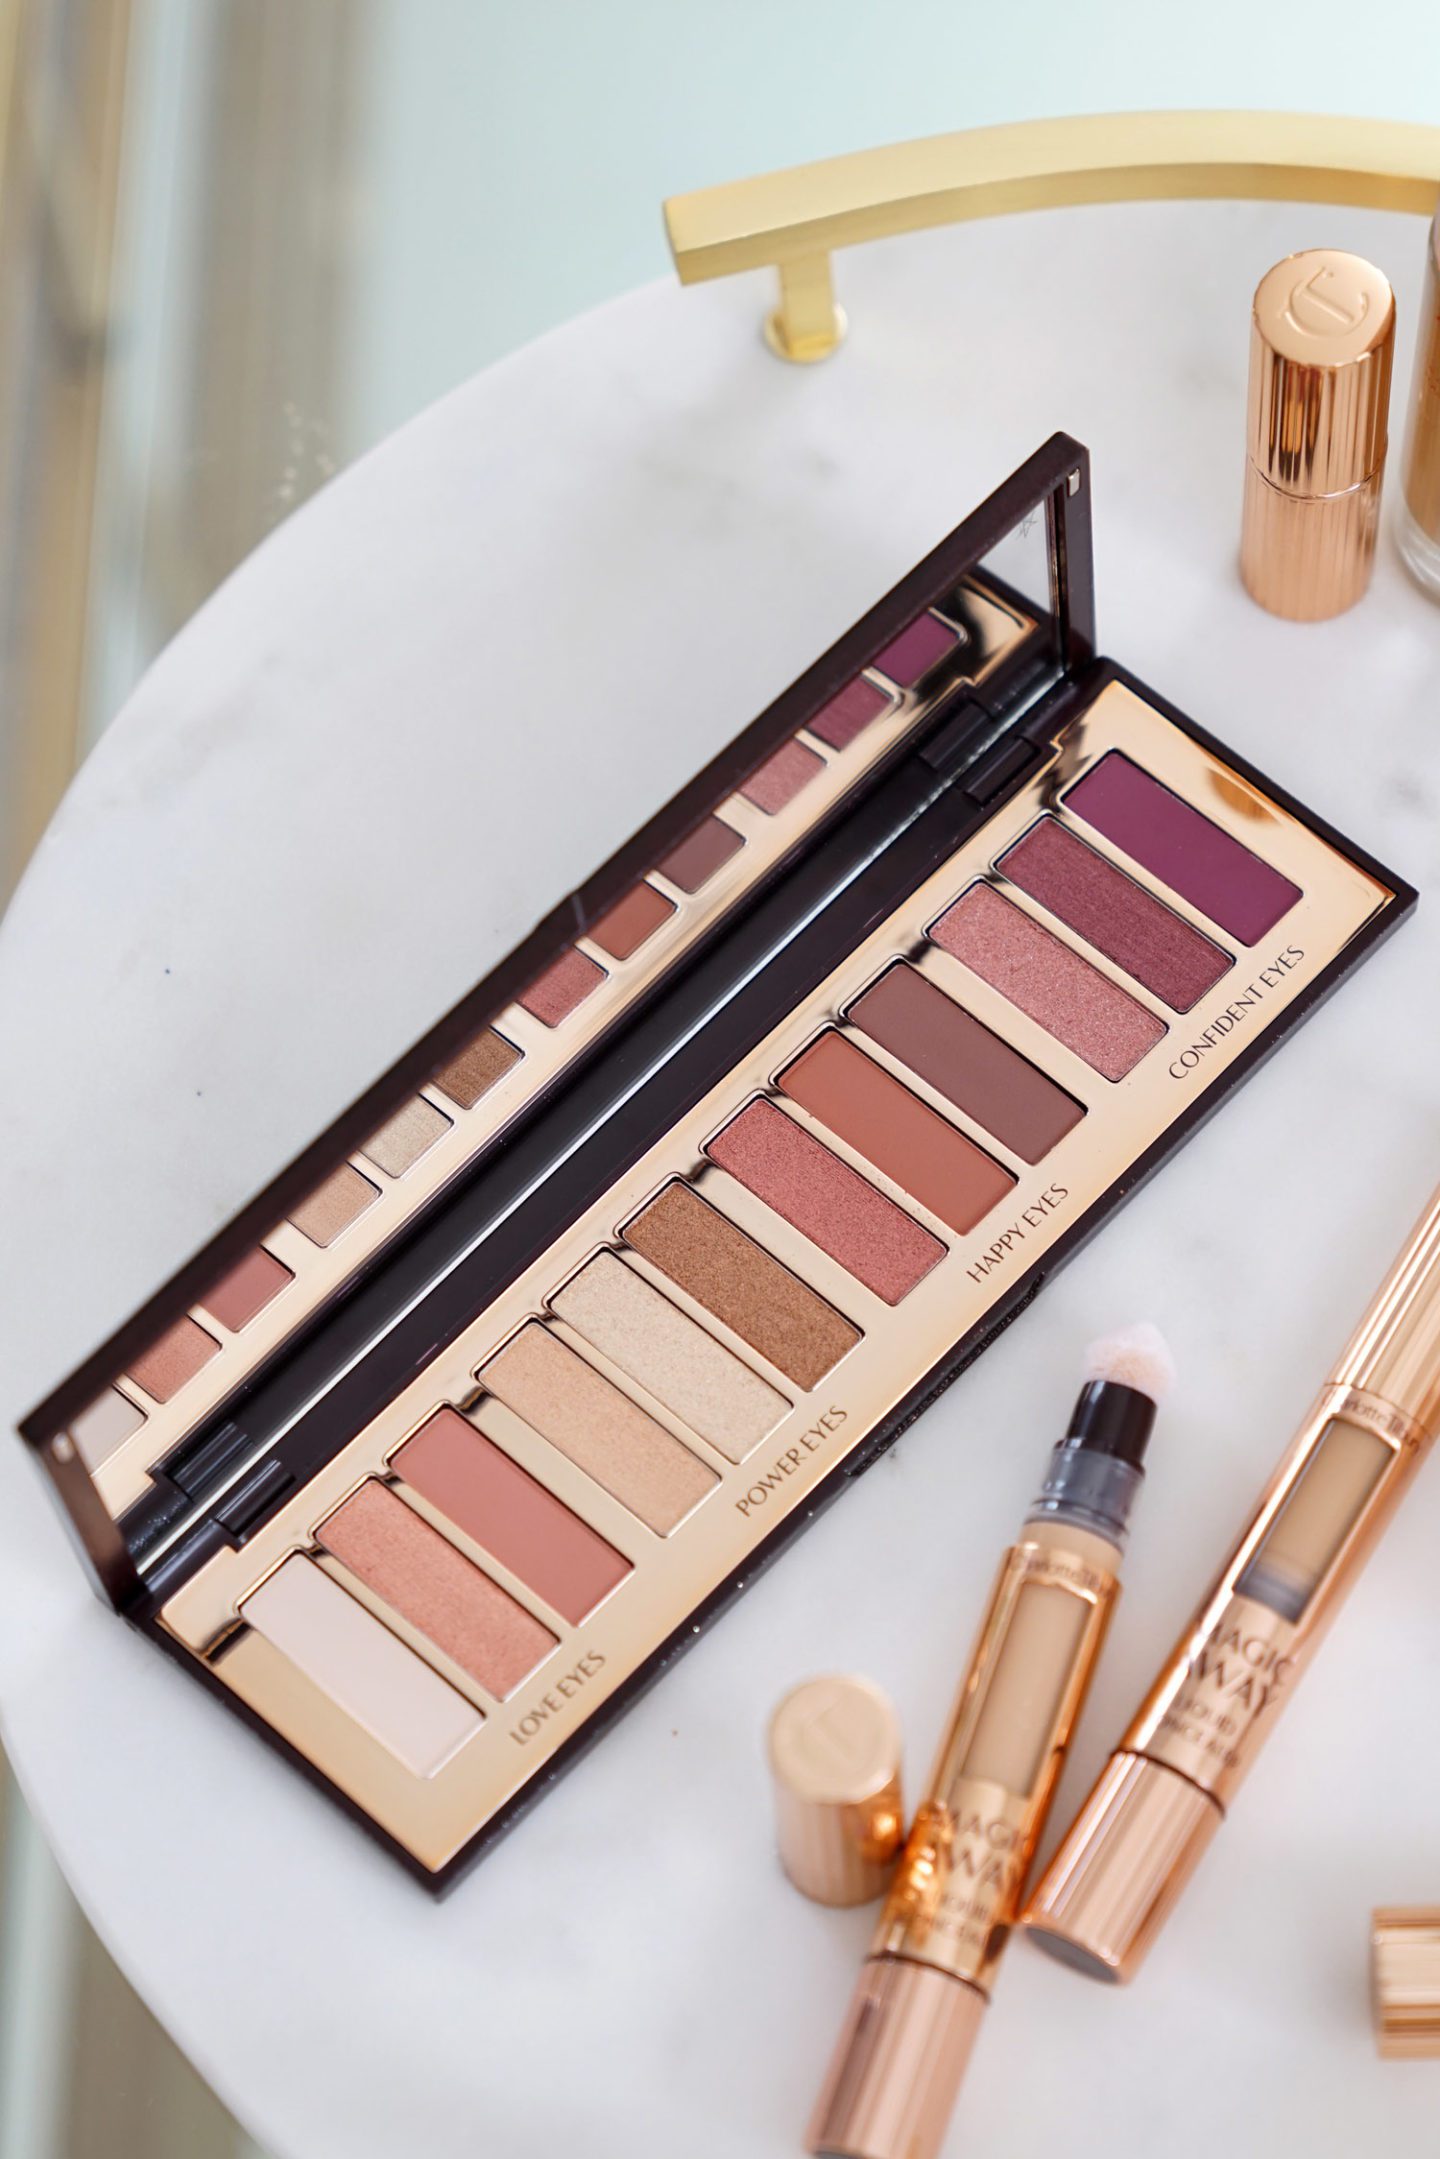 Charlotte Tilbury Stars in Your Eyes Palette Review + Swatches